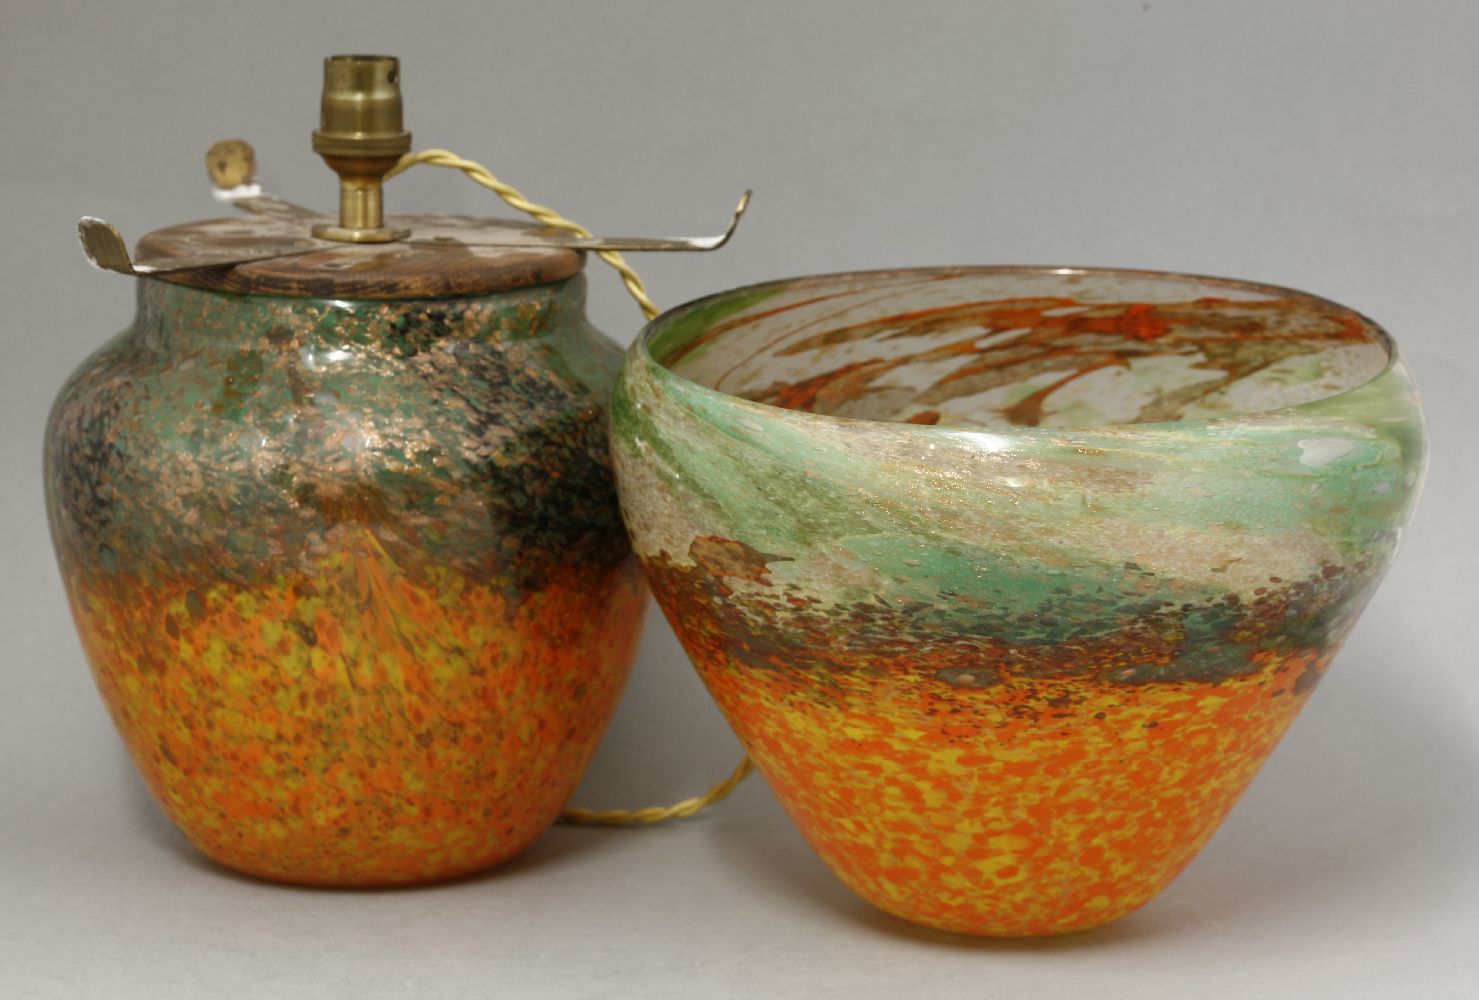 A Monart glass table lamp,the shade and base in mottled green and orange with gold aventurine - Image 3 of 3